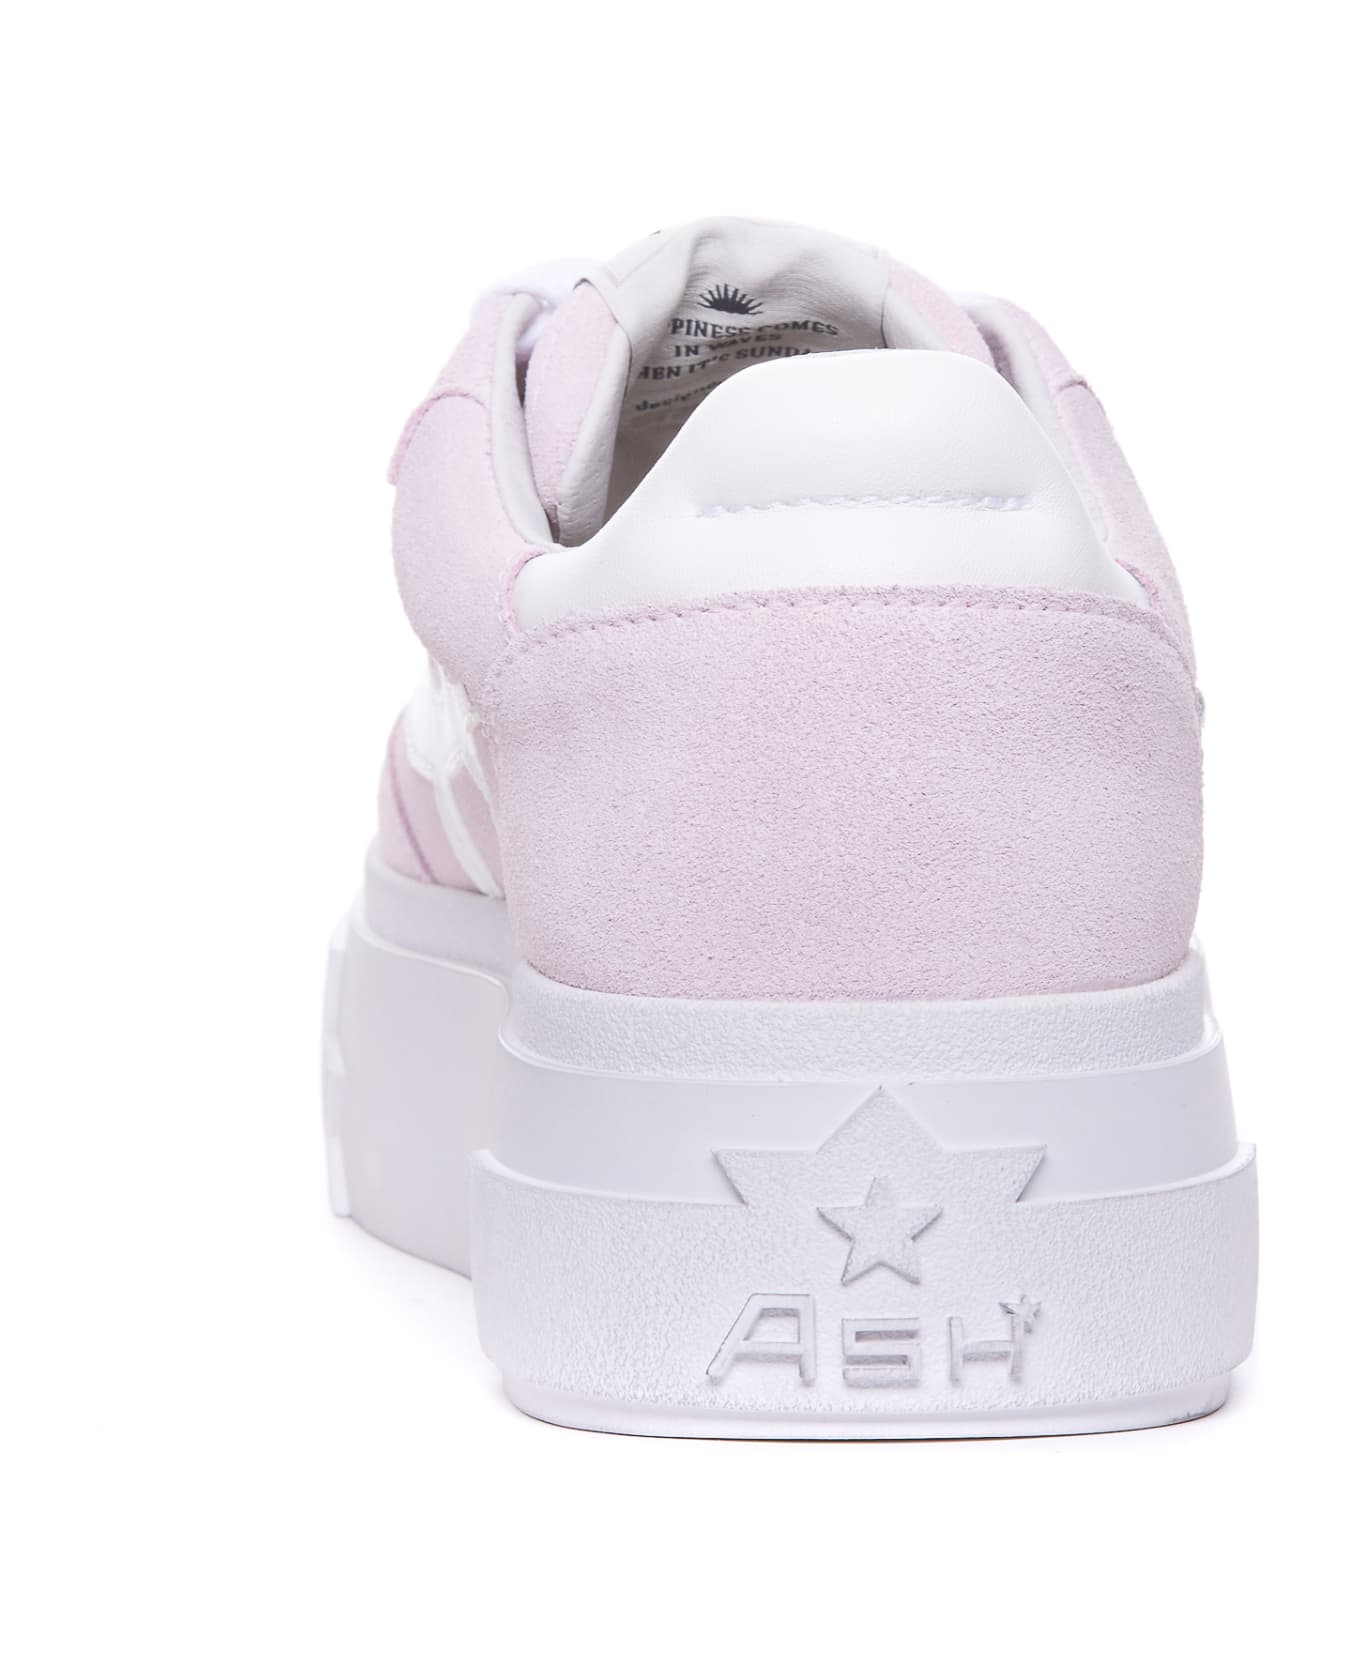 Ash Starmoon Sneakers - Pink スニーカー